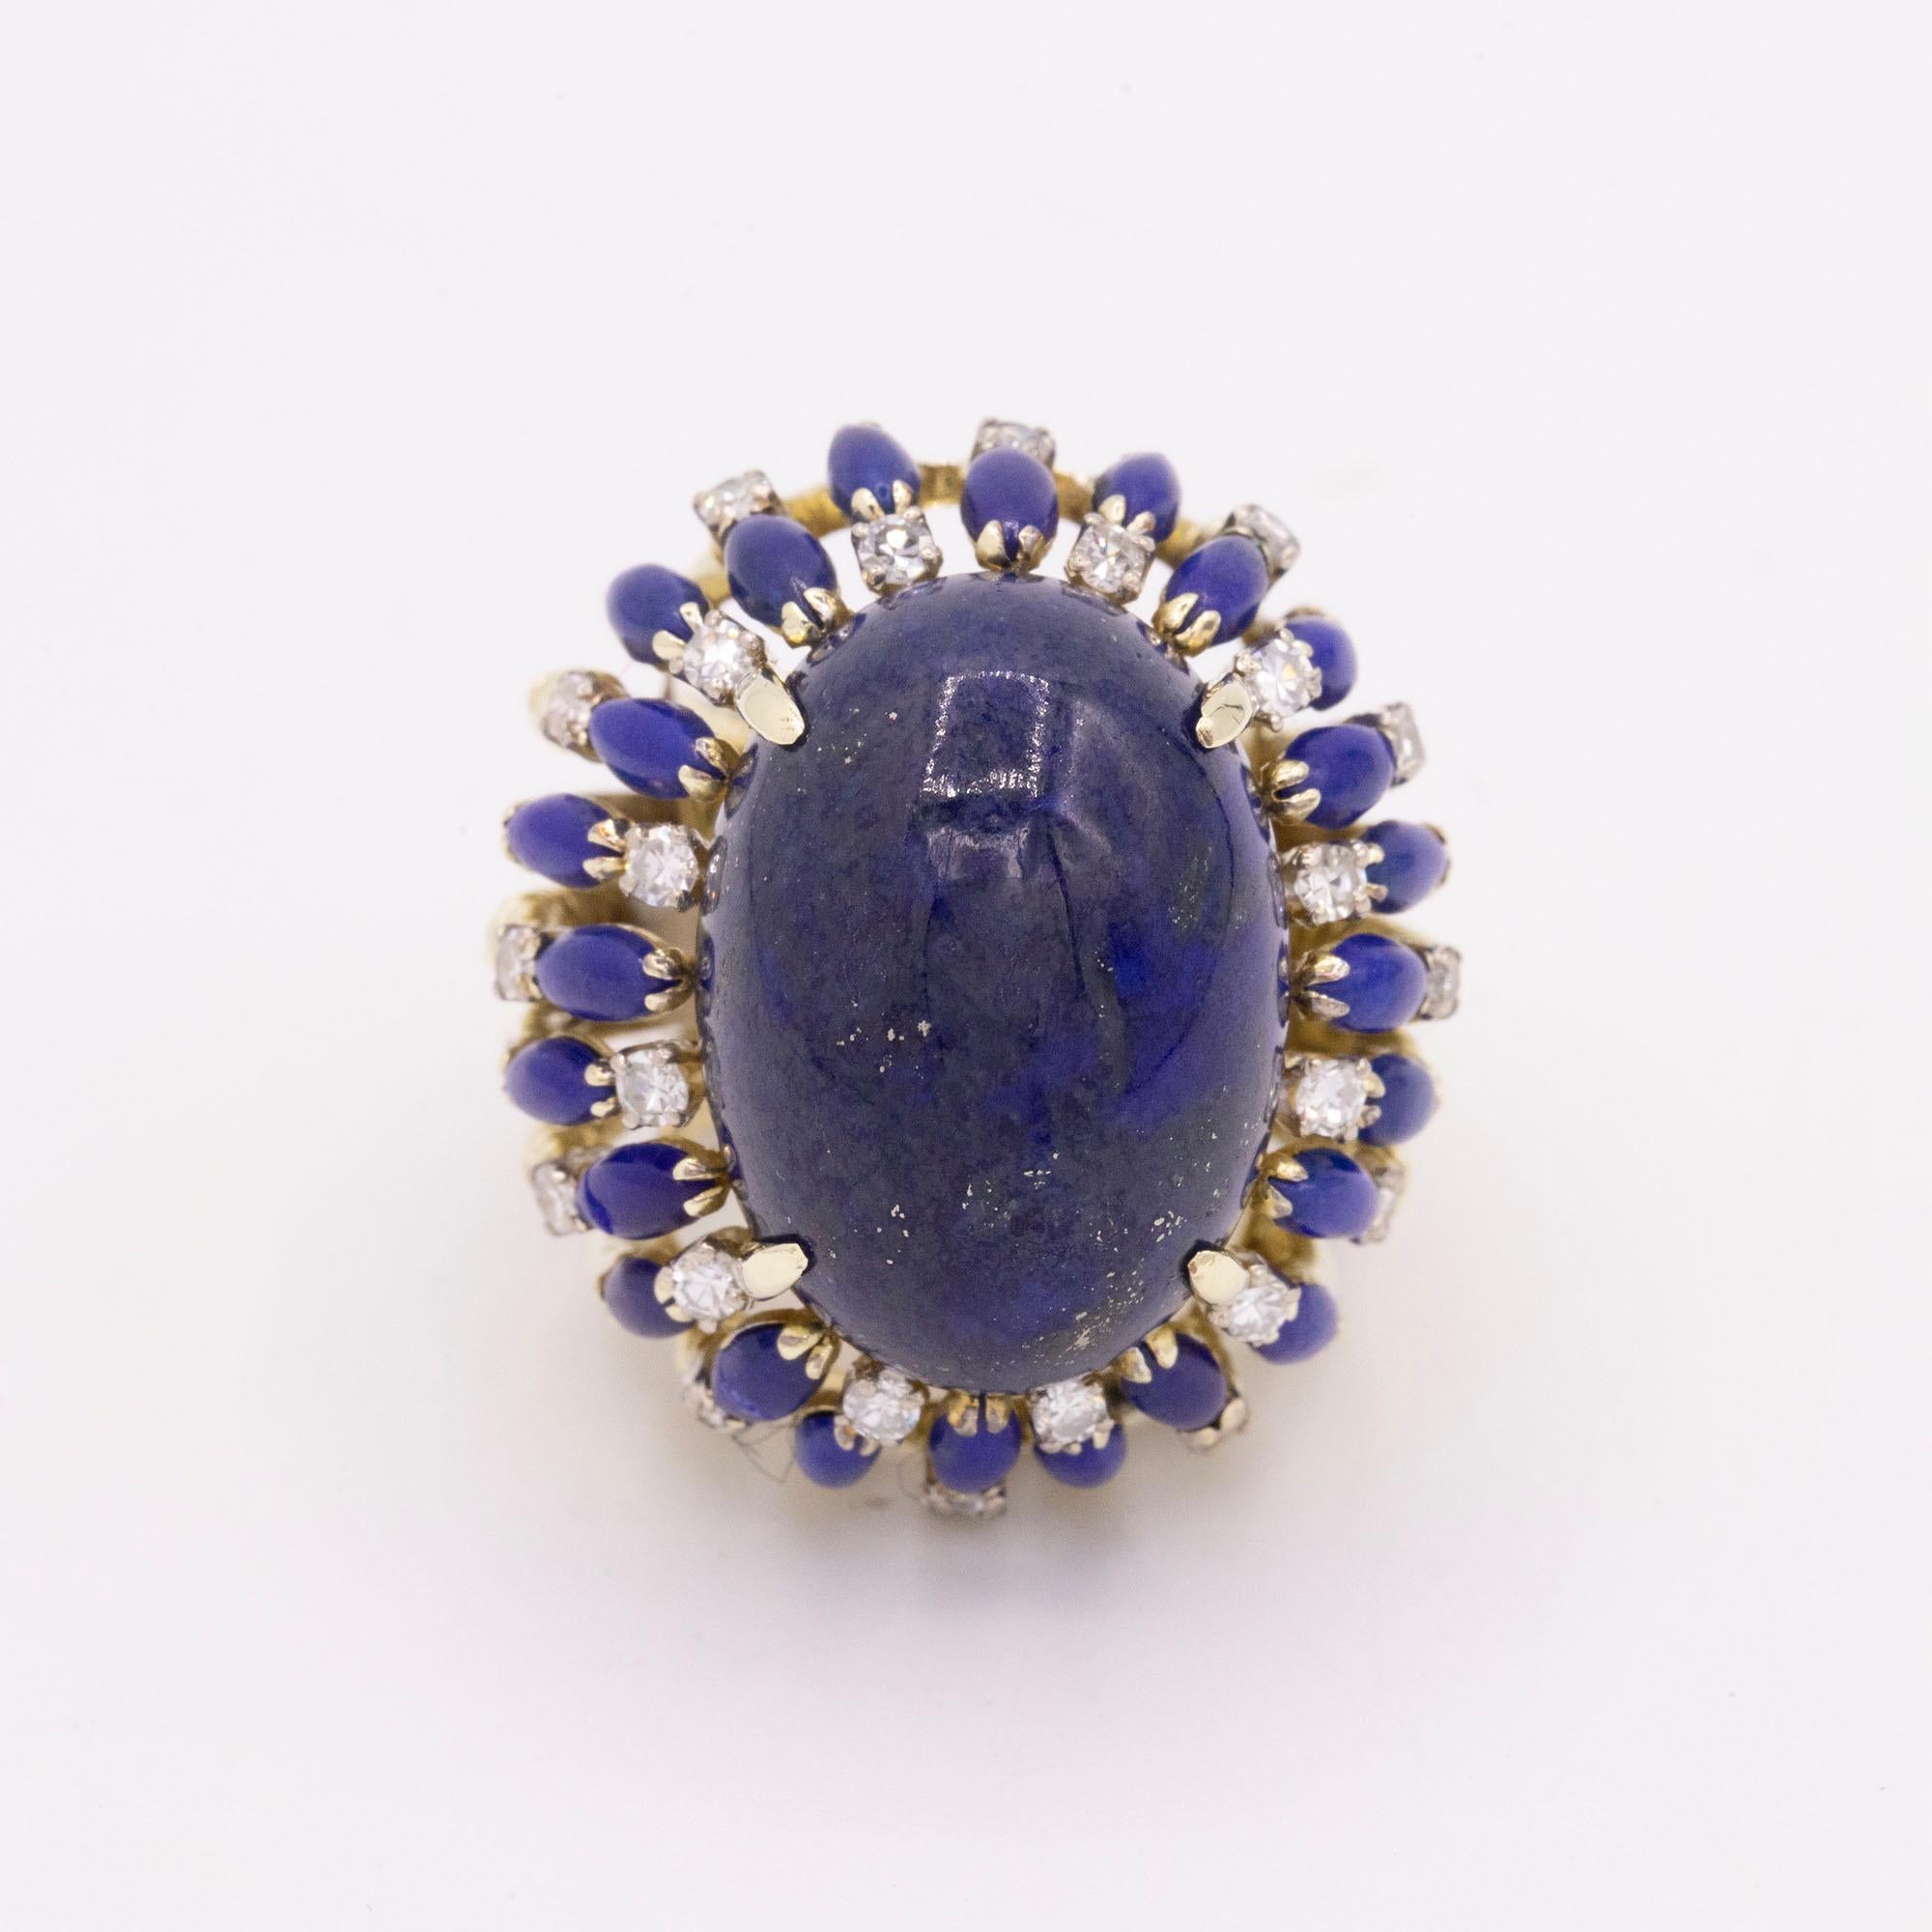 14kt Yellow Gold Lapis & Diamond cocktail ring. Oval Lapsi stone cabochon cut, measures 22mm x 16mm. Single cut diamonds with colors between G-H and a clarity of SI1. The total weight of the diamonds is 1.10 carats. This ring measures at a size 5.